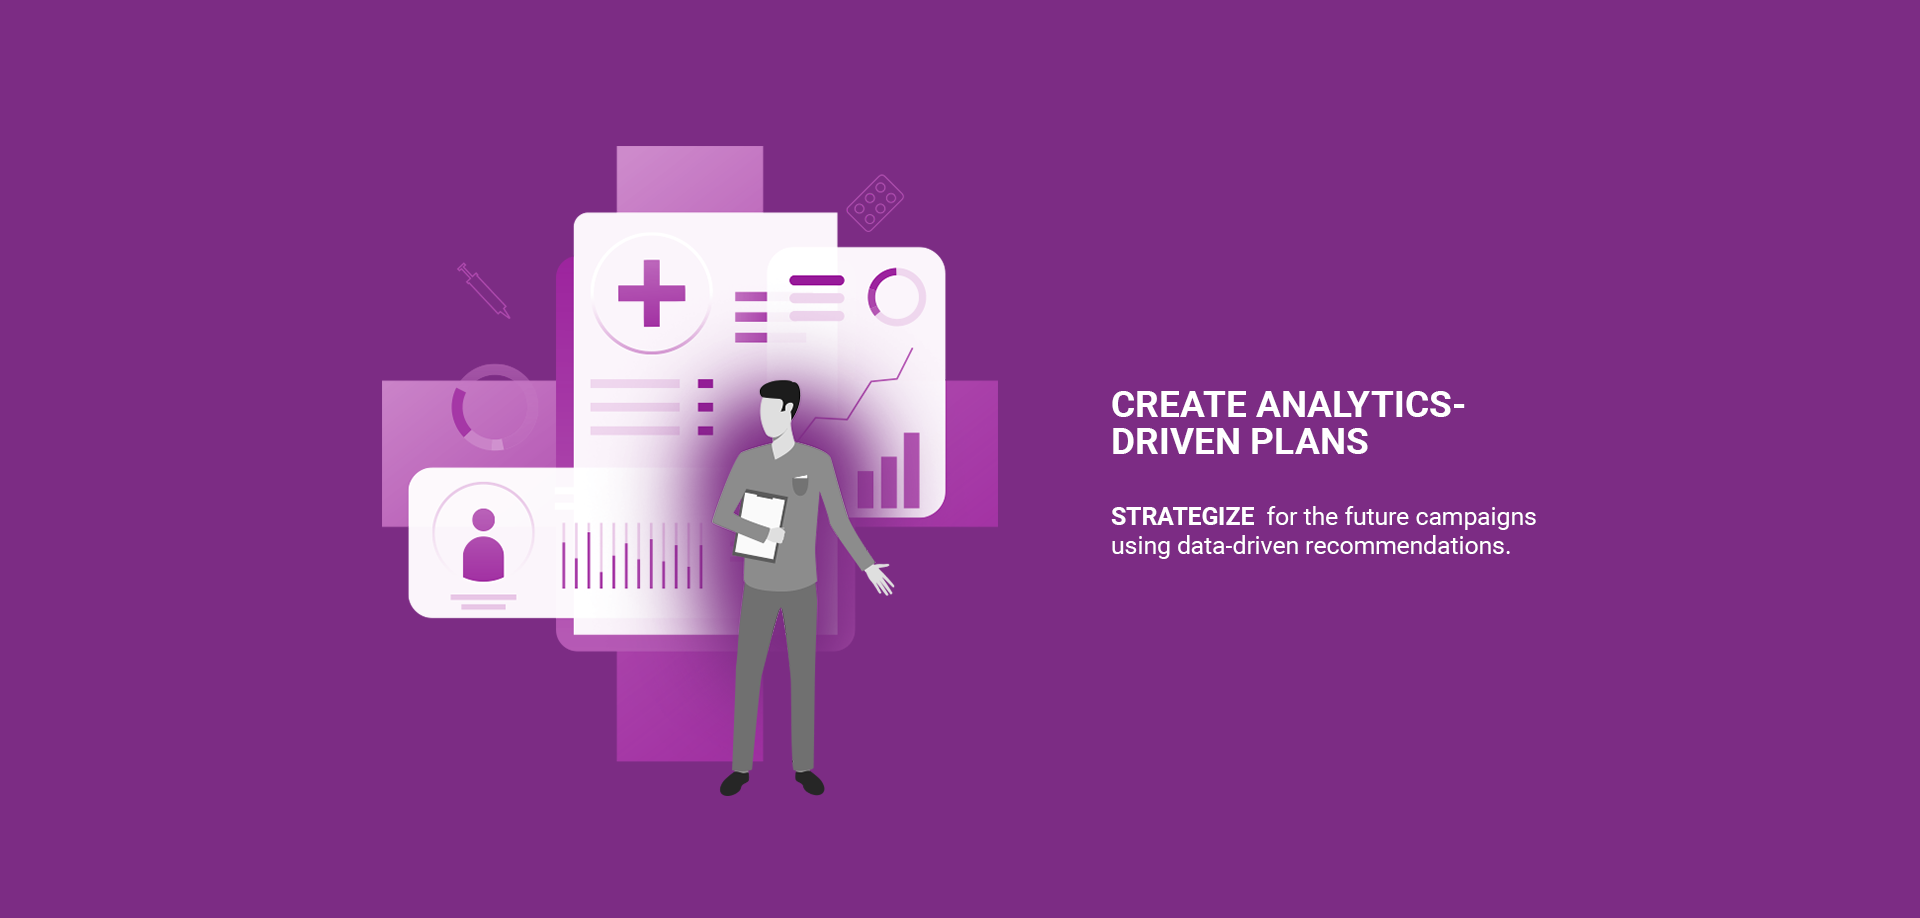 Illustration of an individual with data visualization tools and medical icons highlighting the theme "CREATE ANALYTICS-DRIVEN PLANS"